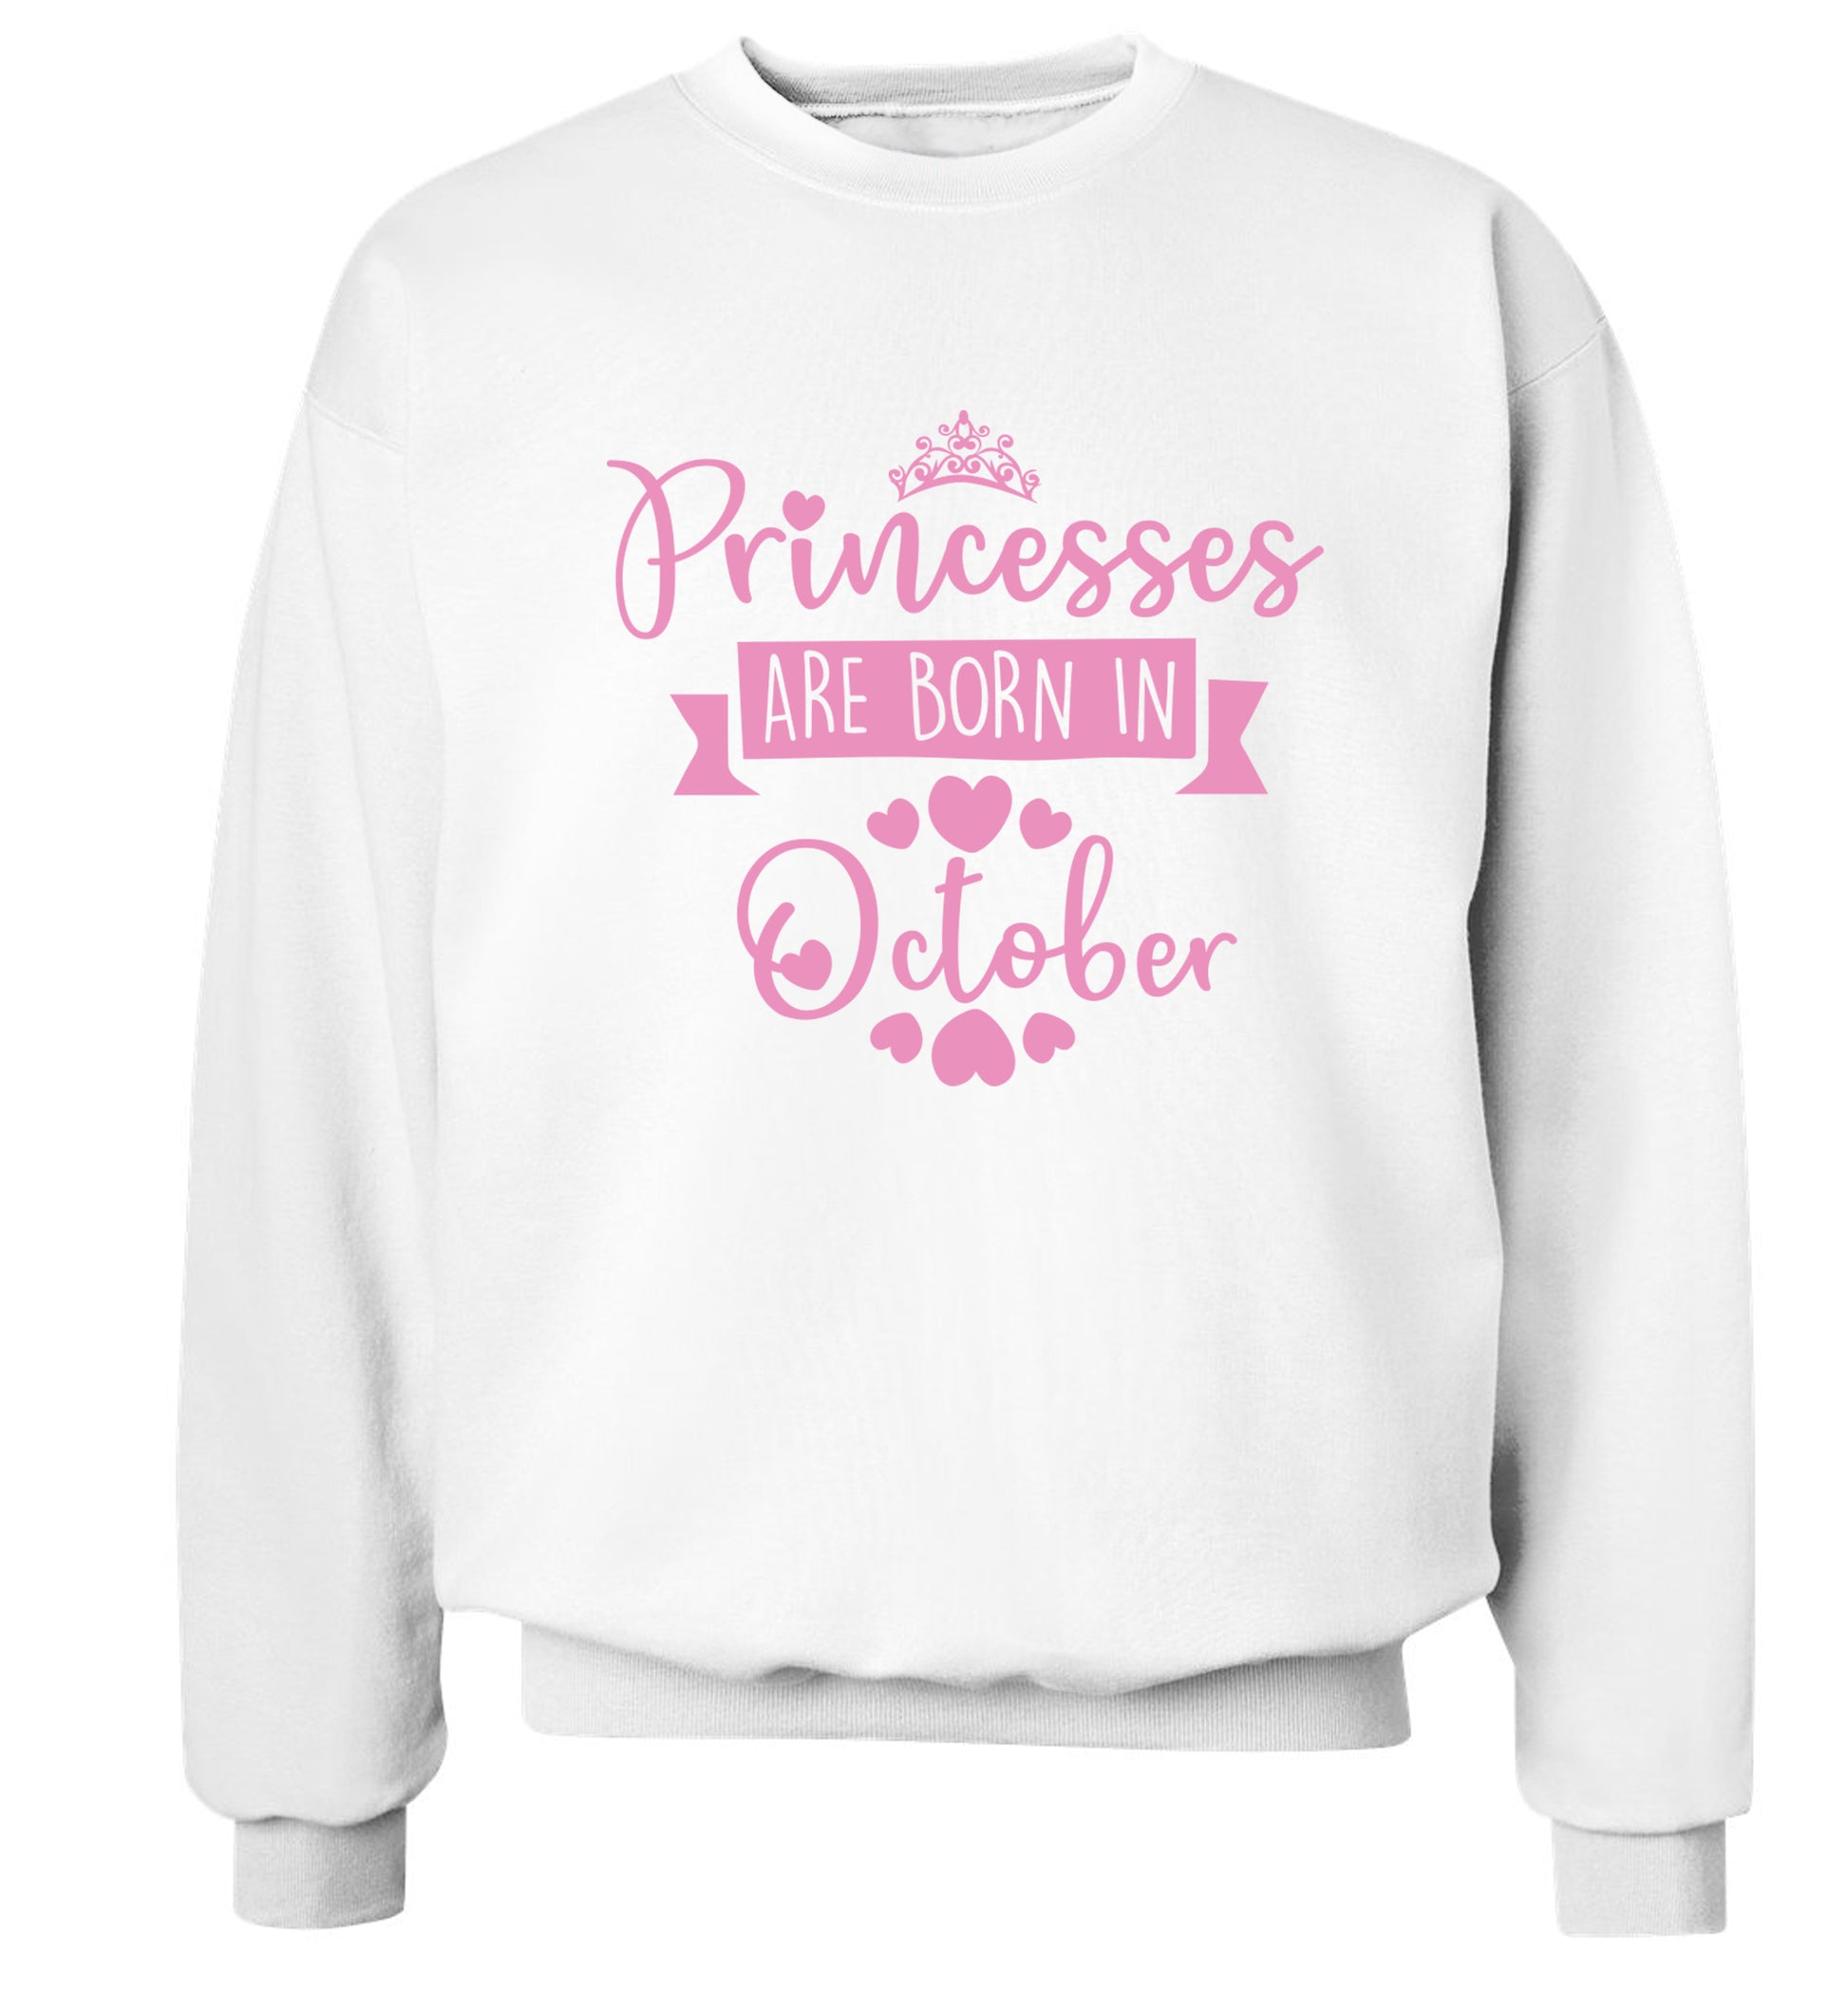 Princesses are born in October Adult's unisex white Sweater 2XL